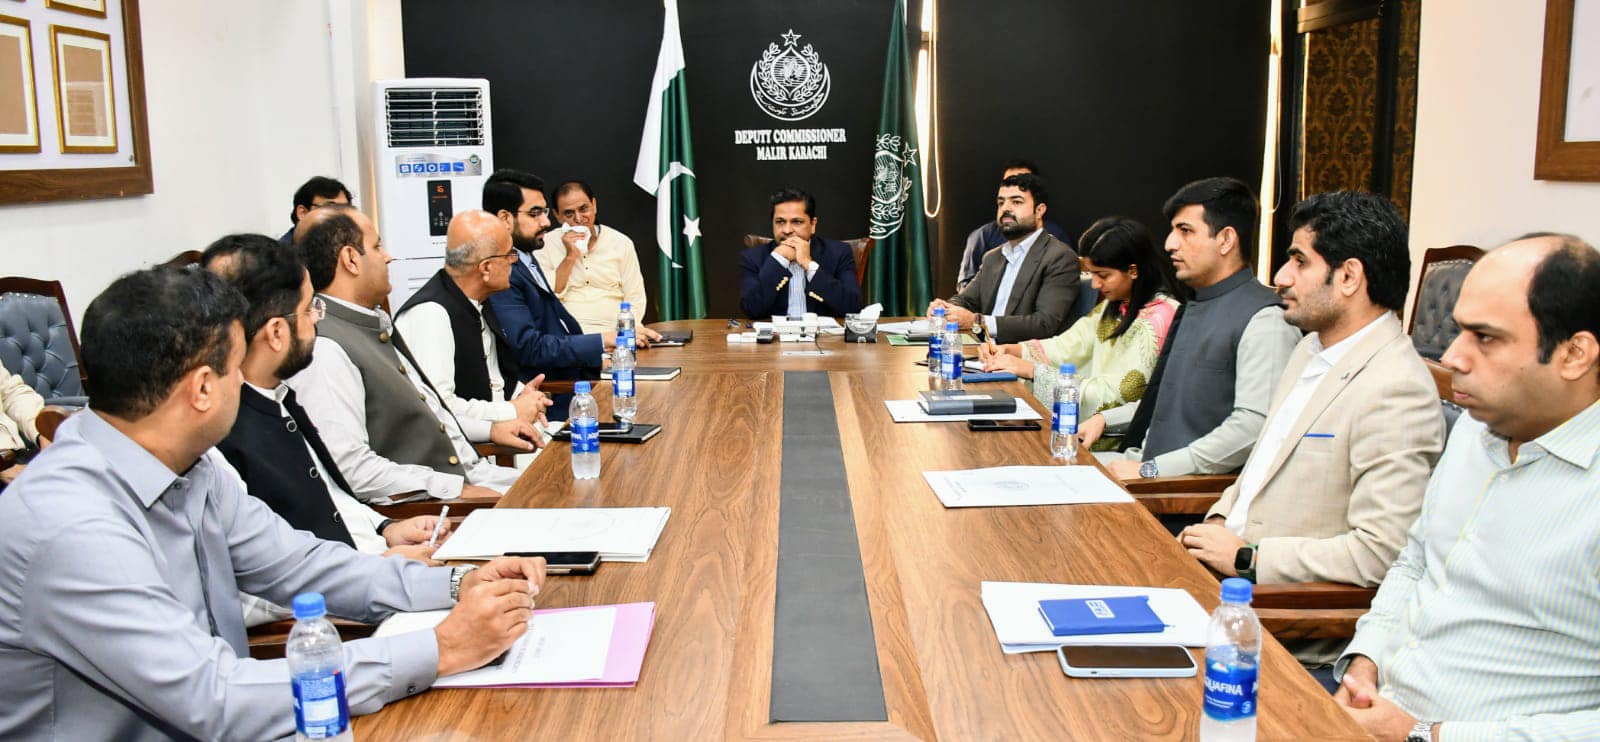 Commissioner Karachi Syed Hassan Naqvi, PAS visited District Malir and held meeting with Deputy Commissioner Malir Mr. Arfan Salam Mirawani PAS, and all the Assistant Commissioners and Mukhtiarkars of District Malir, Karachi, The DC Malir given presentati